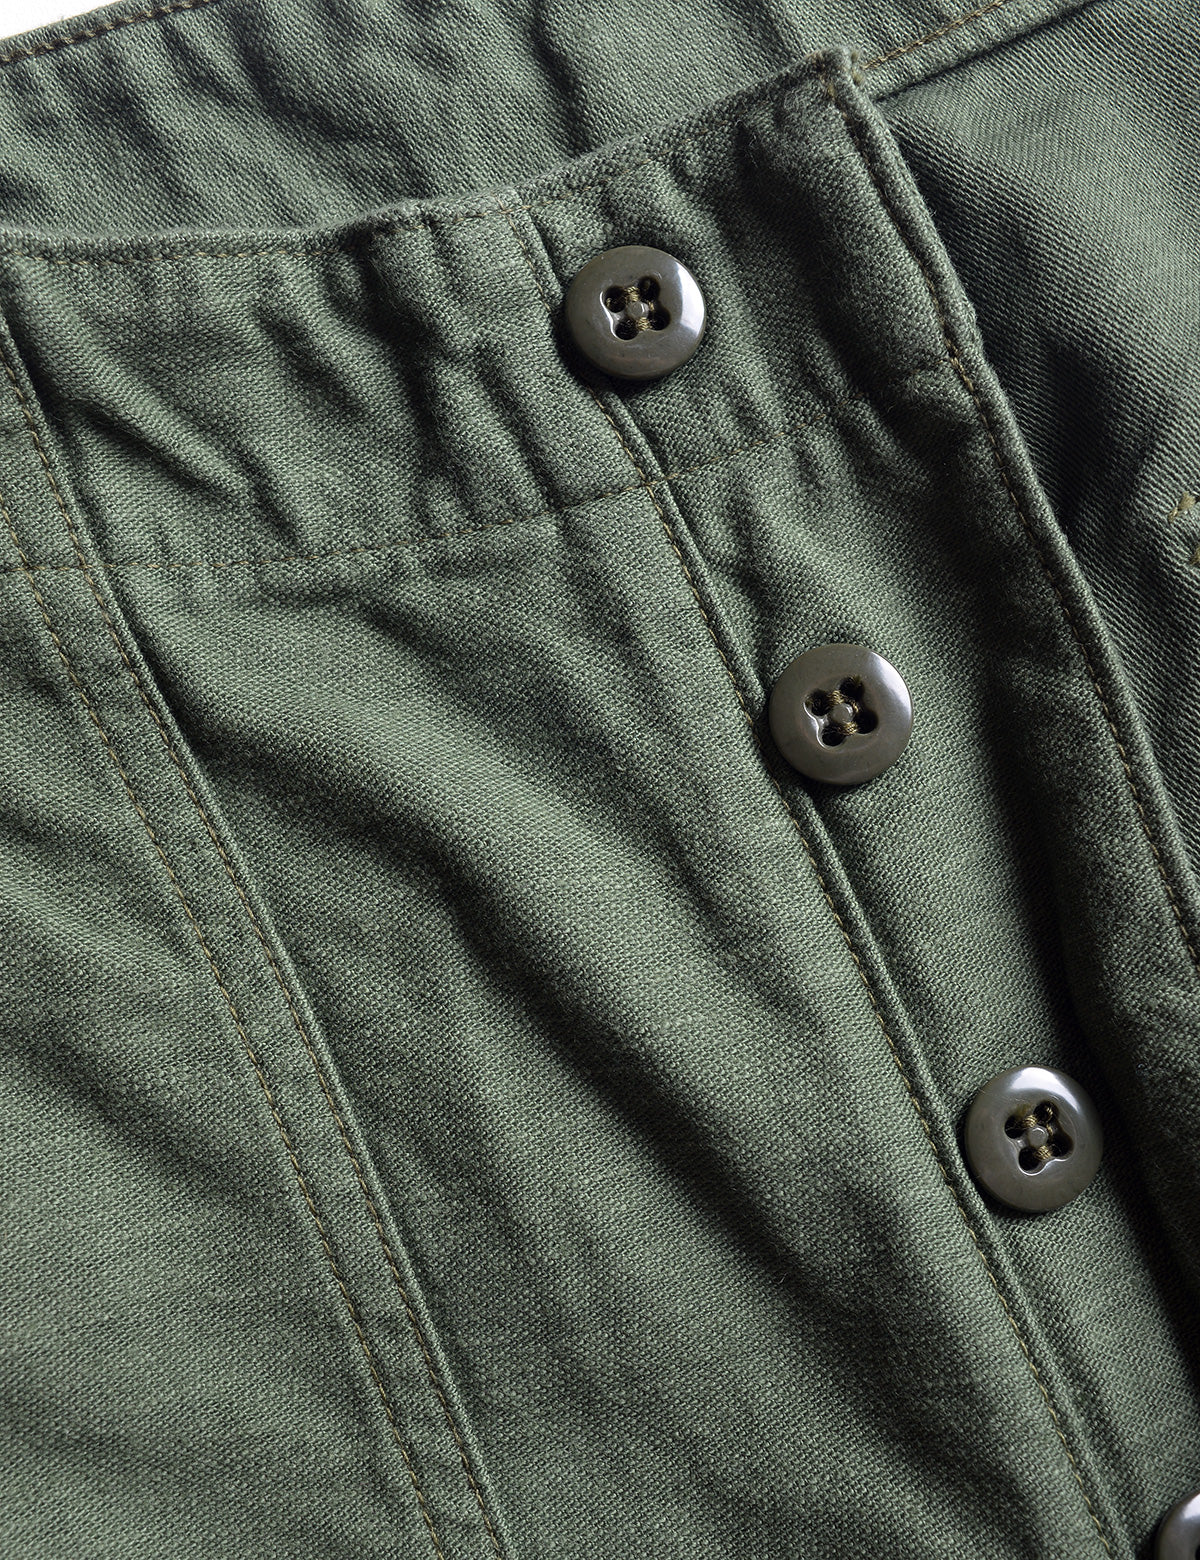 Button fly detail on Orslow US Army Fatigue Trousers - Army Green